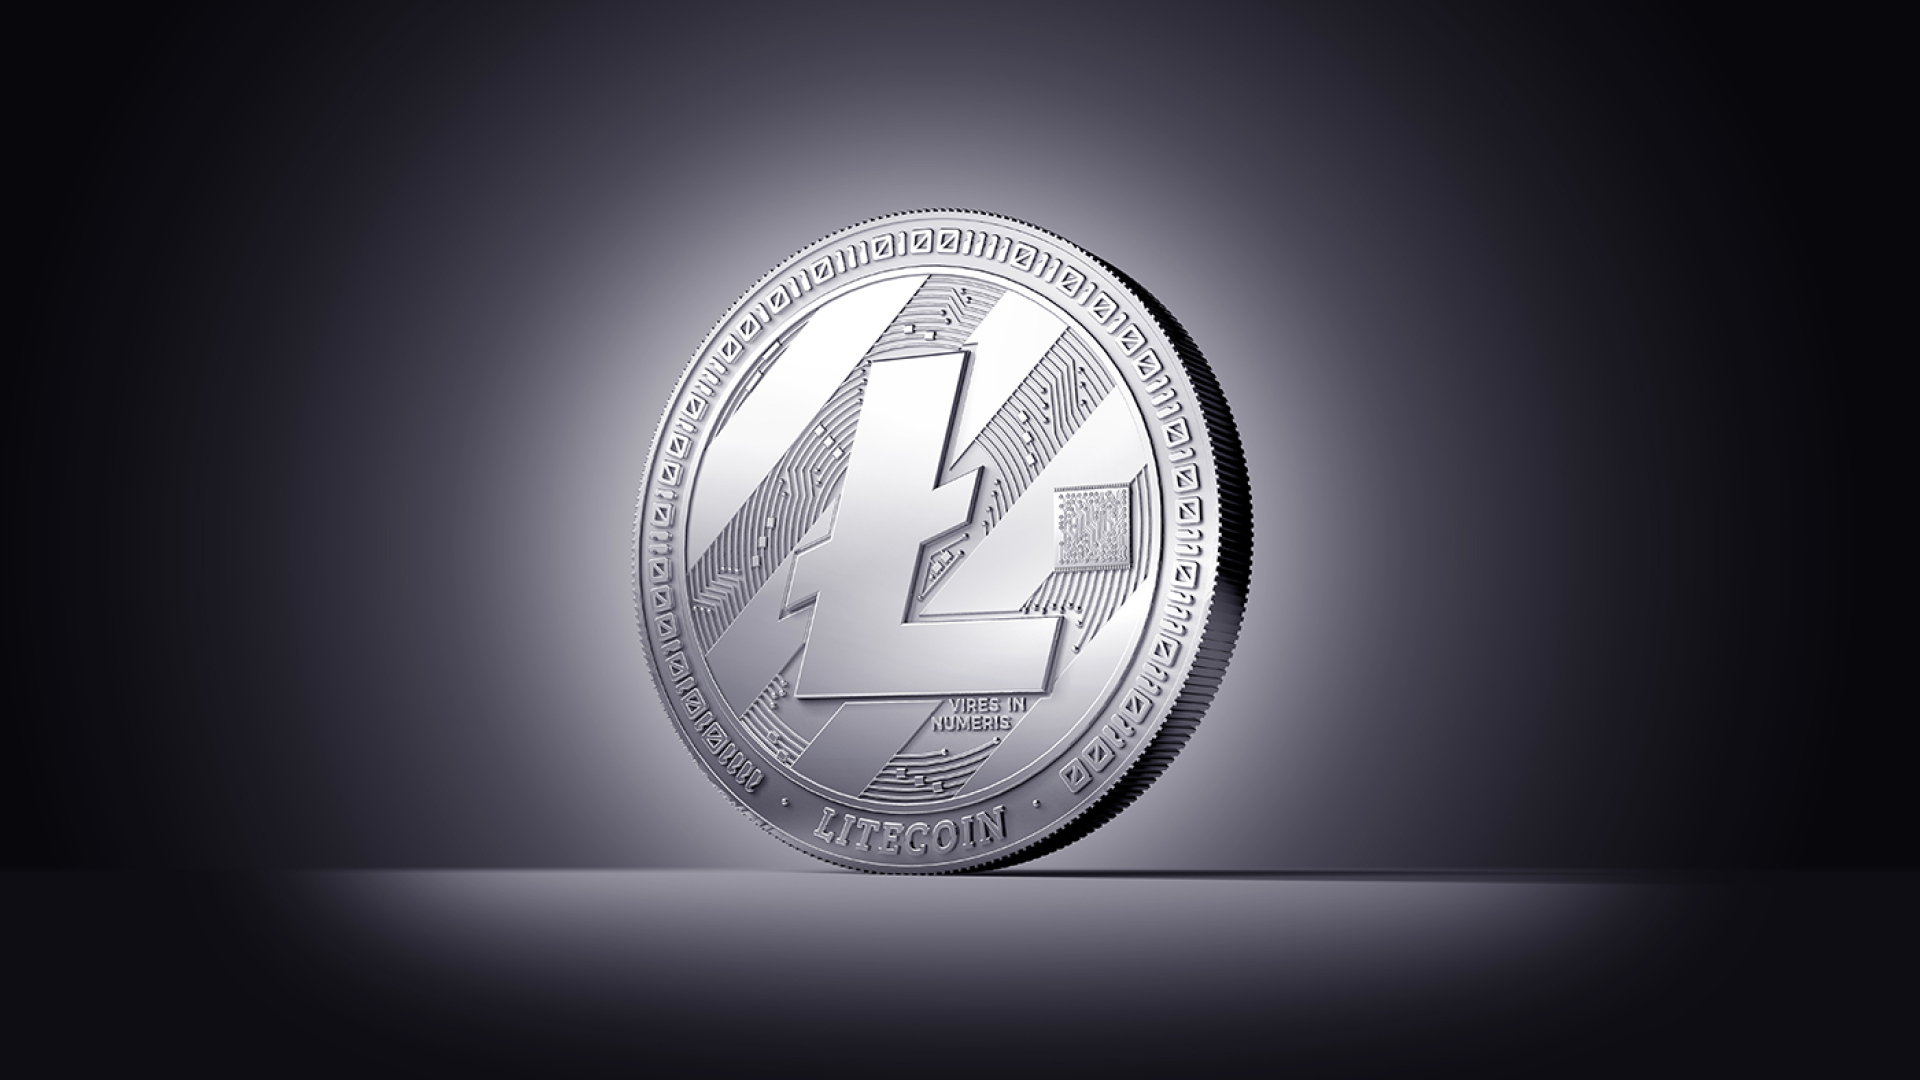 Litecoin: Digital silver and Bitcoin's younger brother